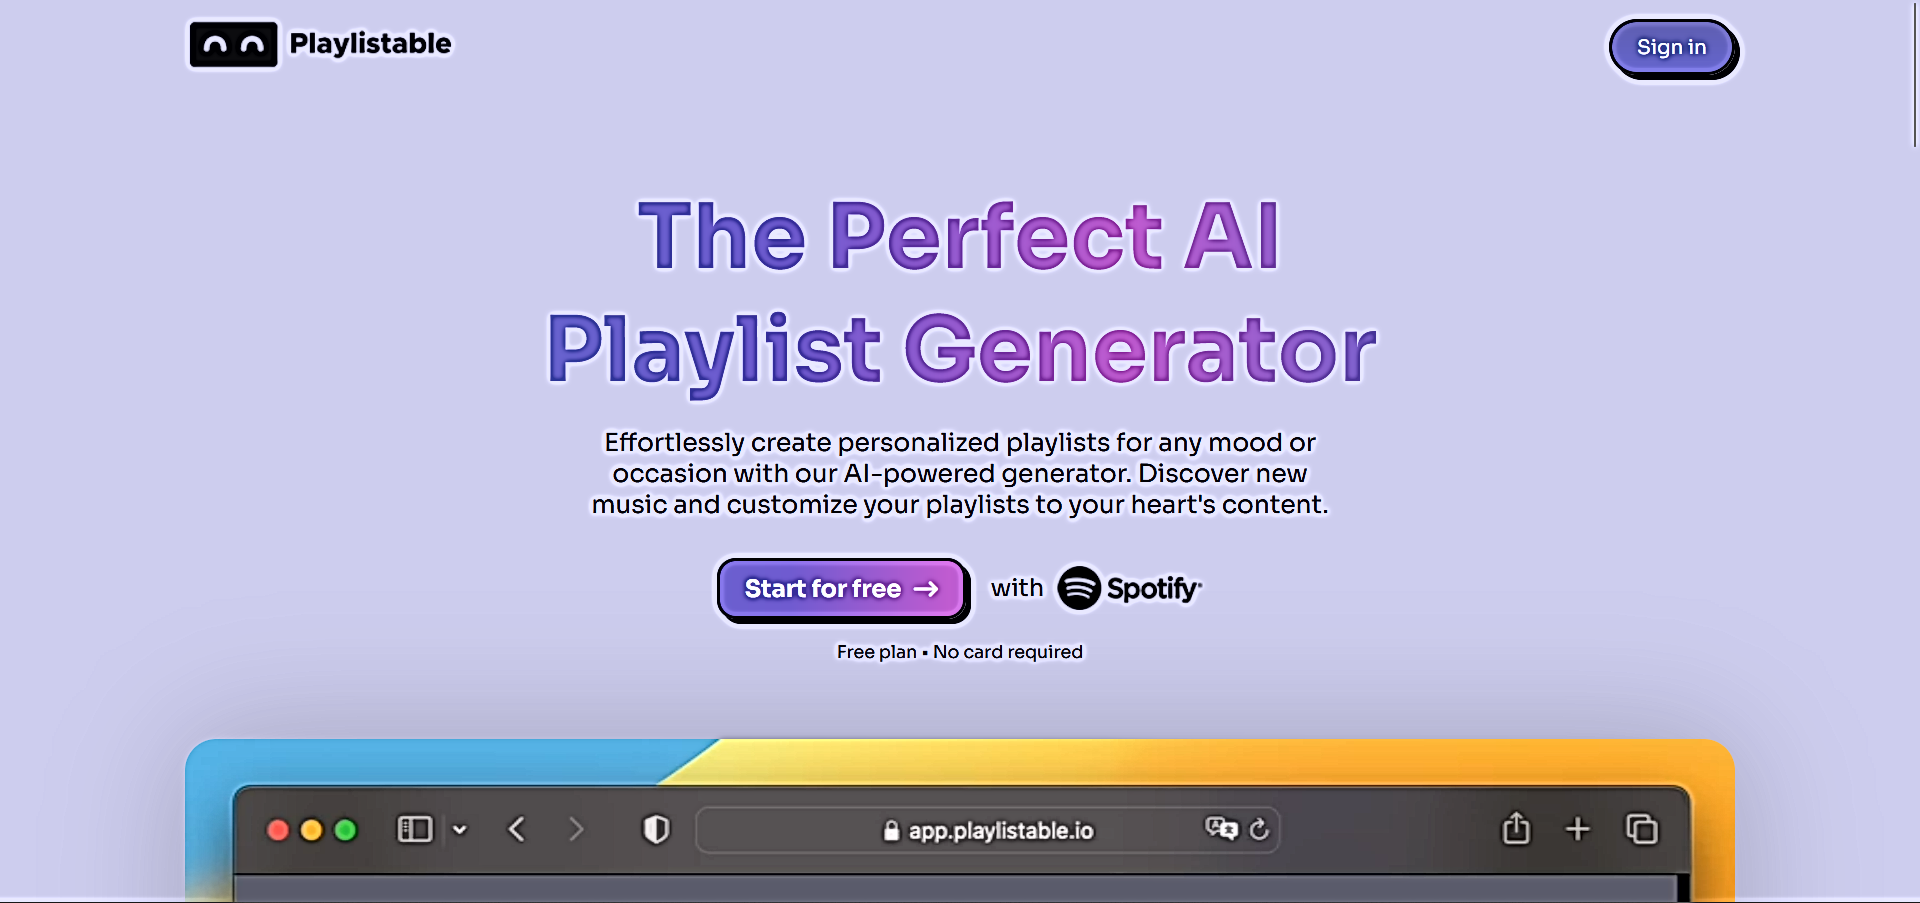 Playlistable featured